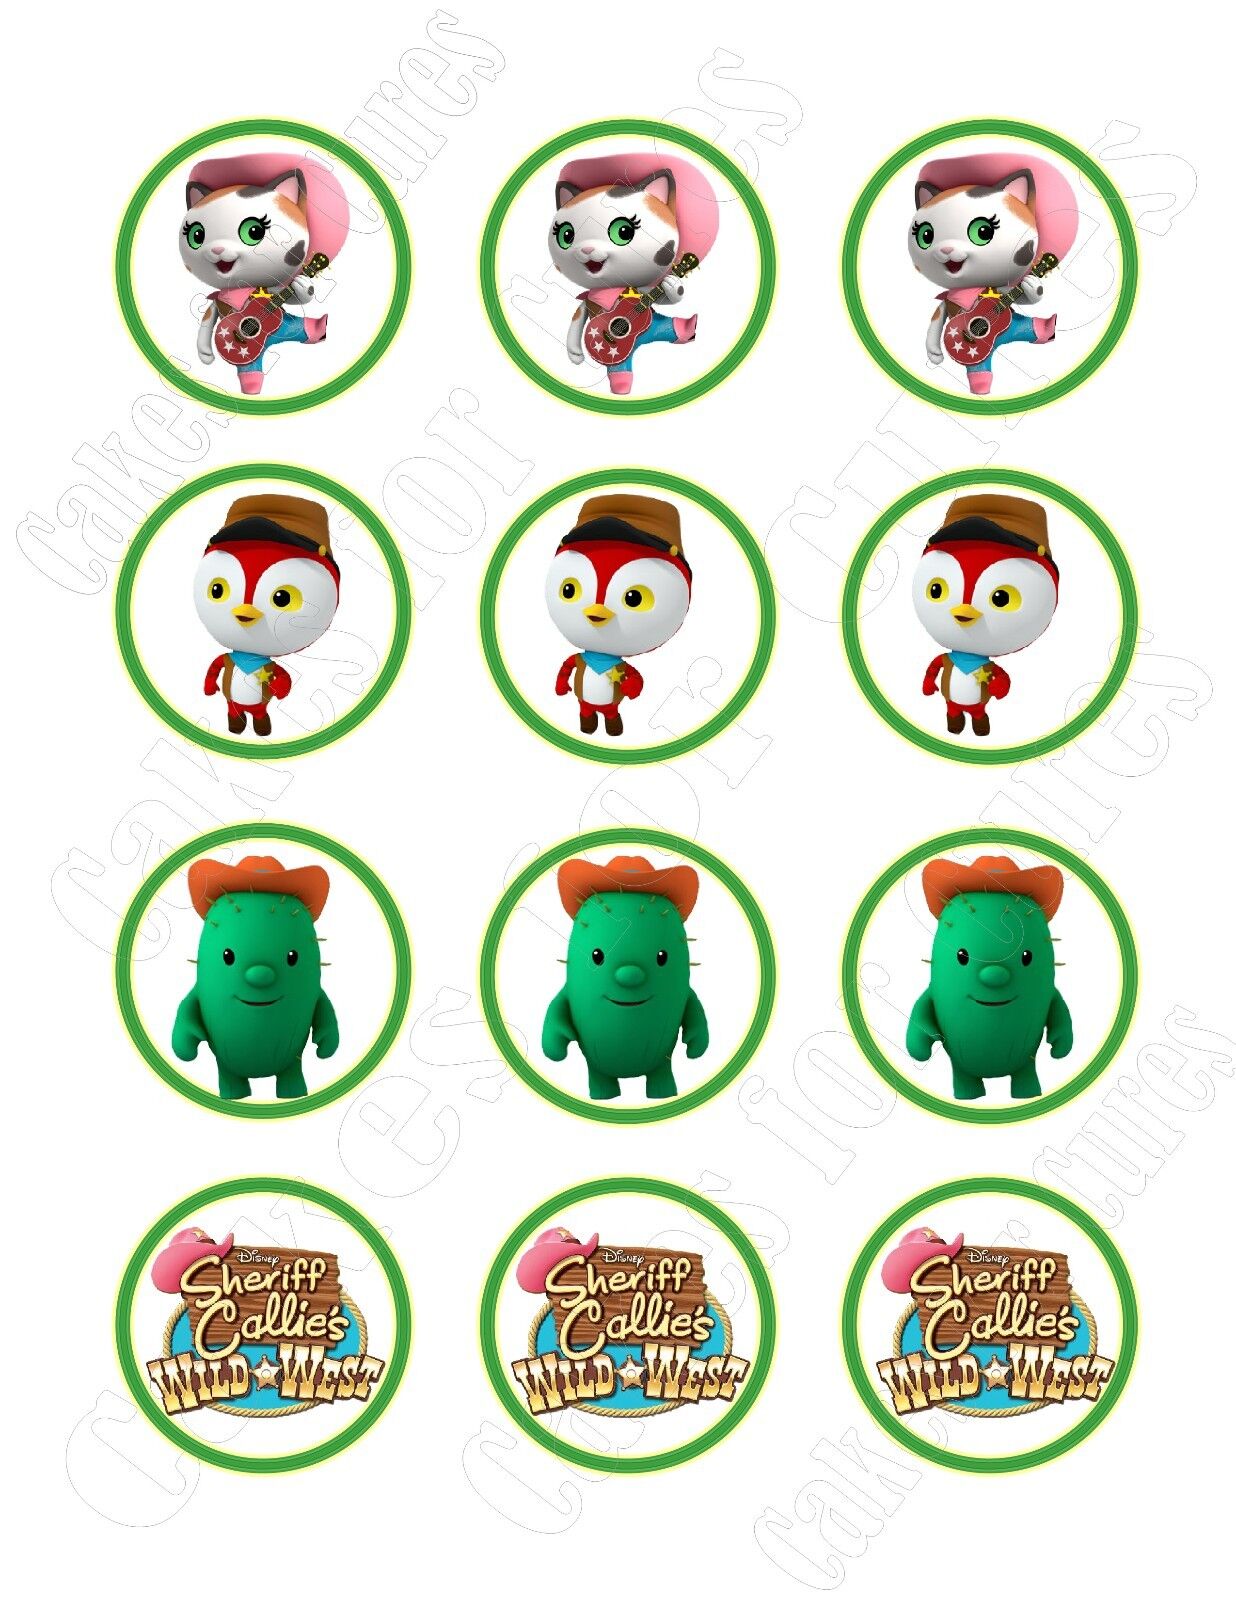 Sheriff Callie's Wild West party edible cupcake toppers frosting